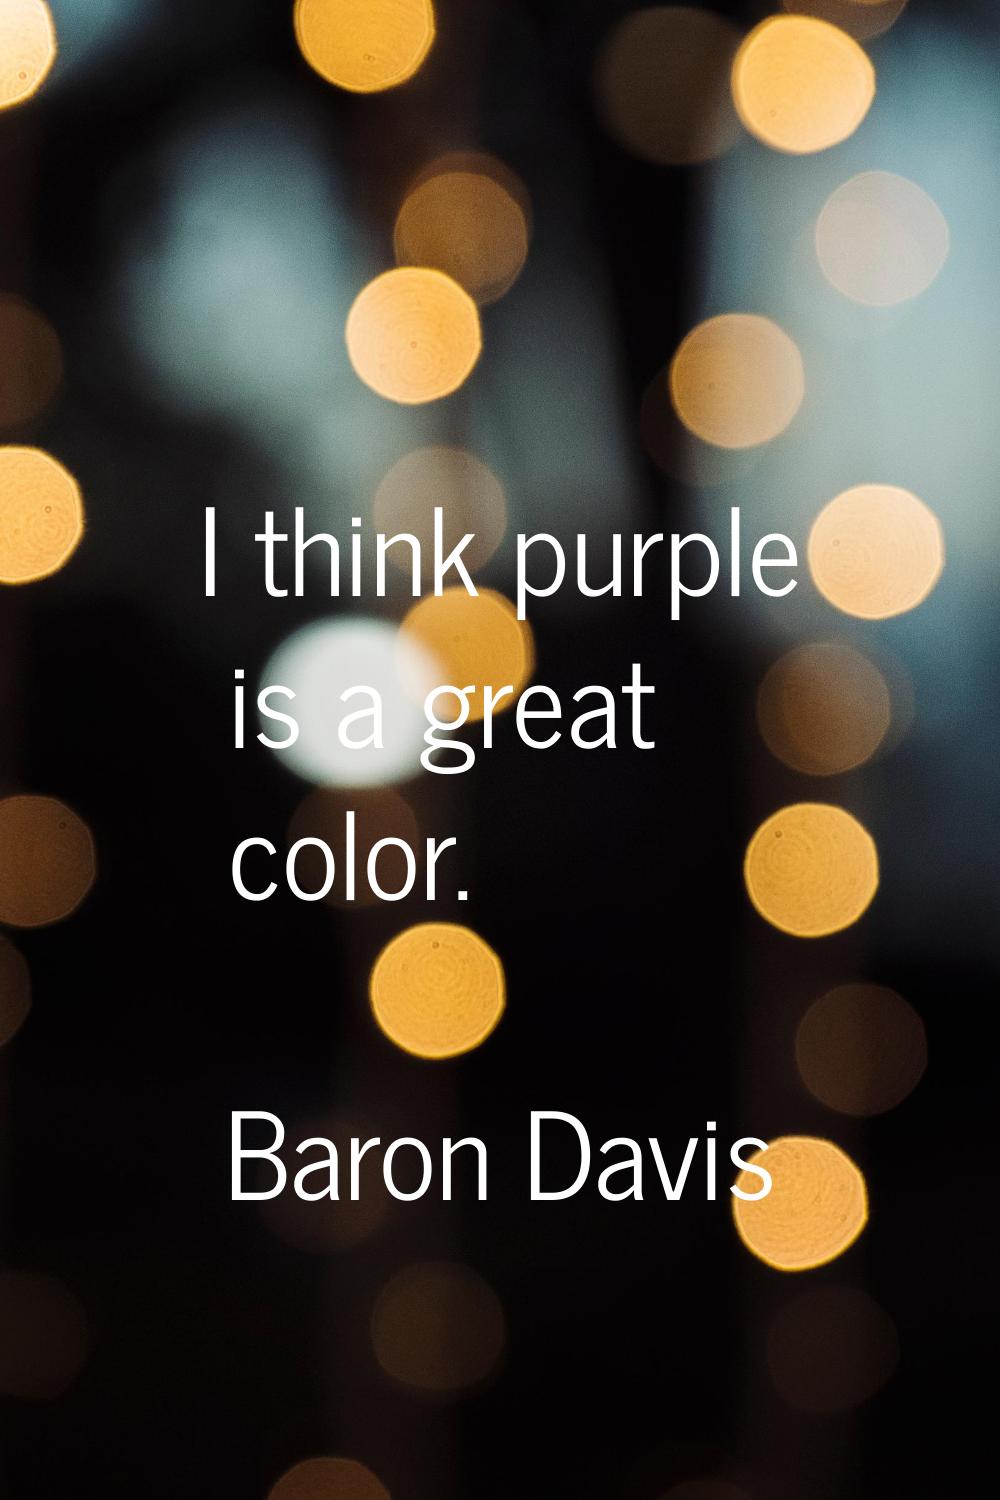 I think purple is a great color.